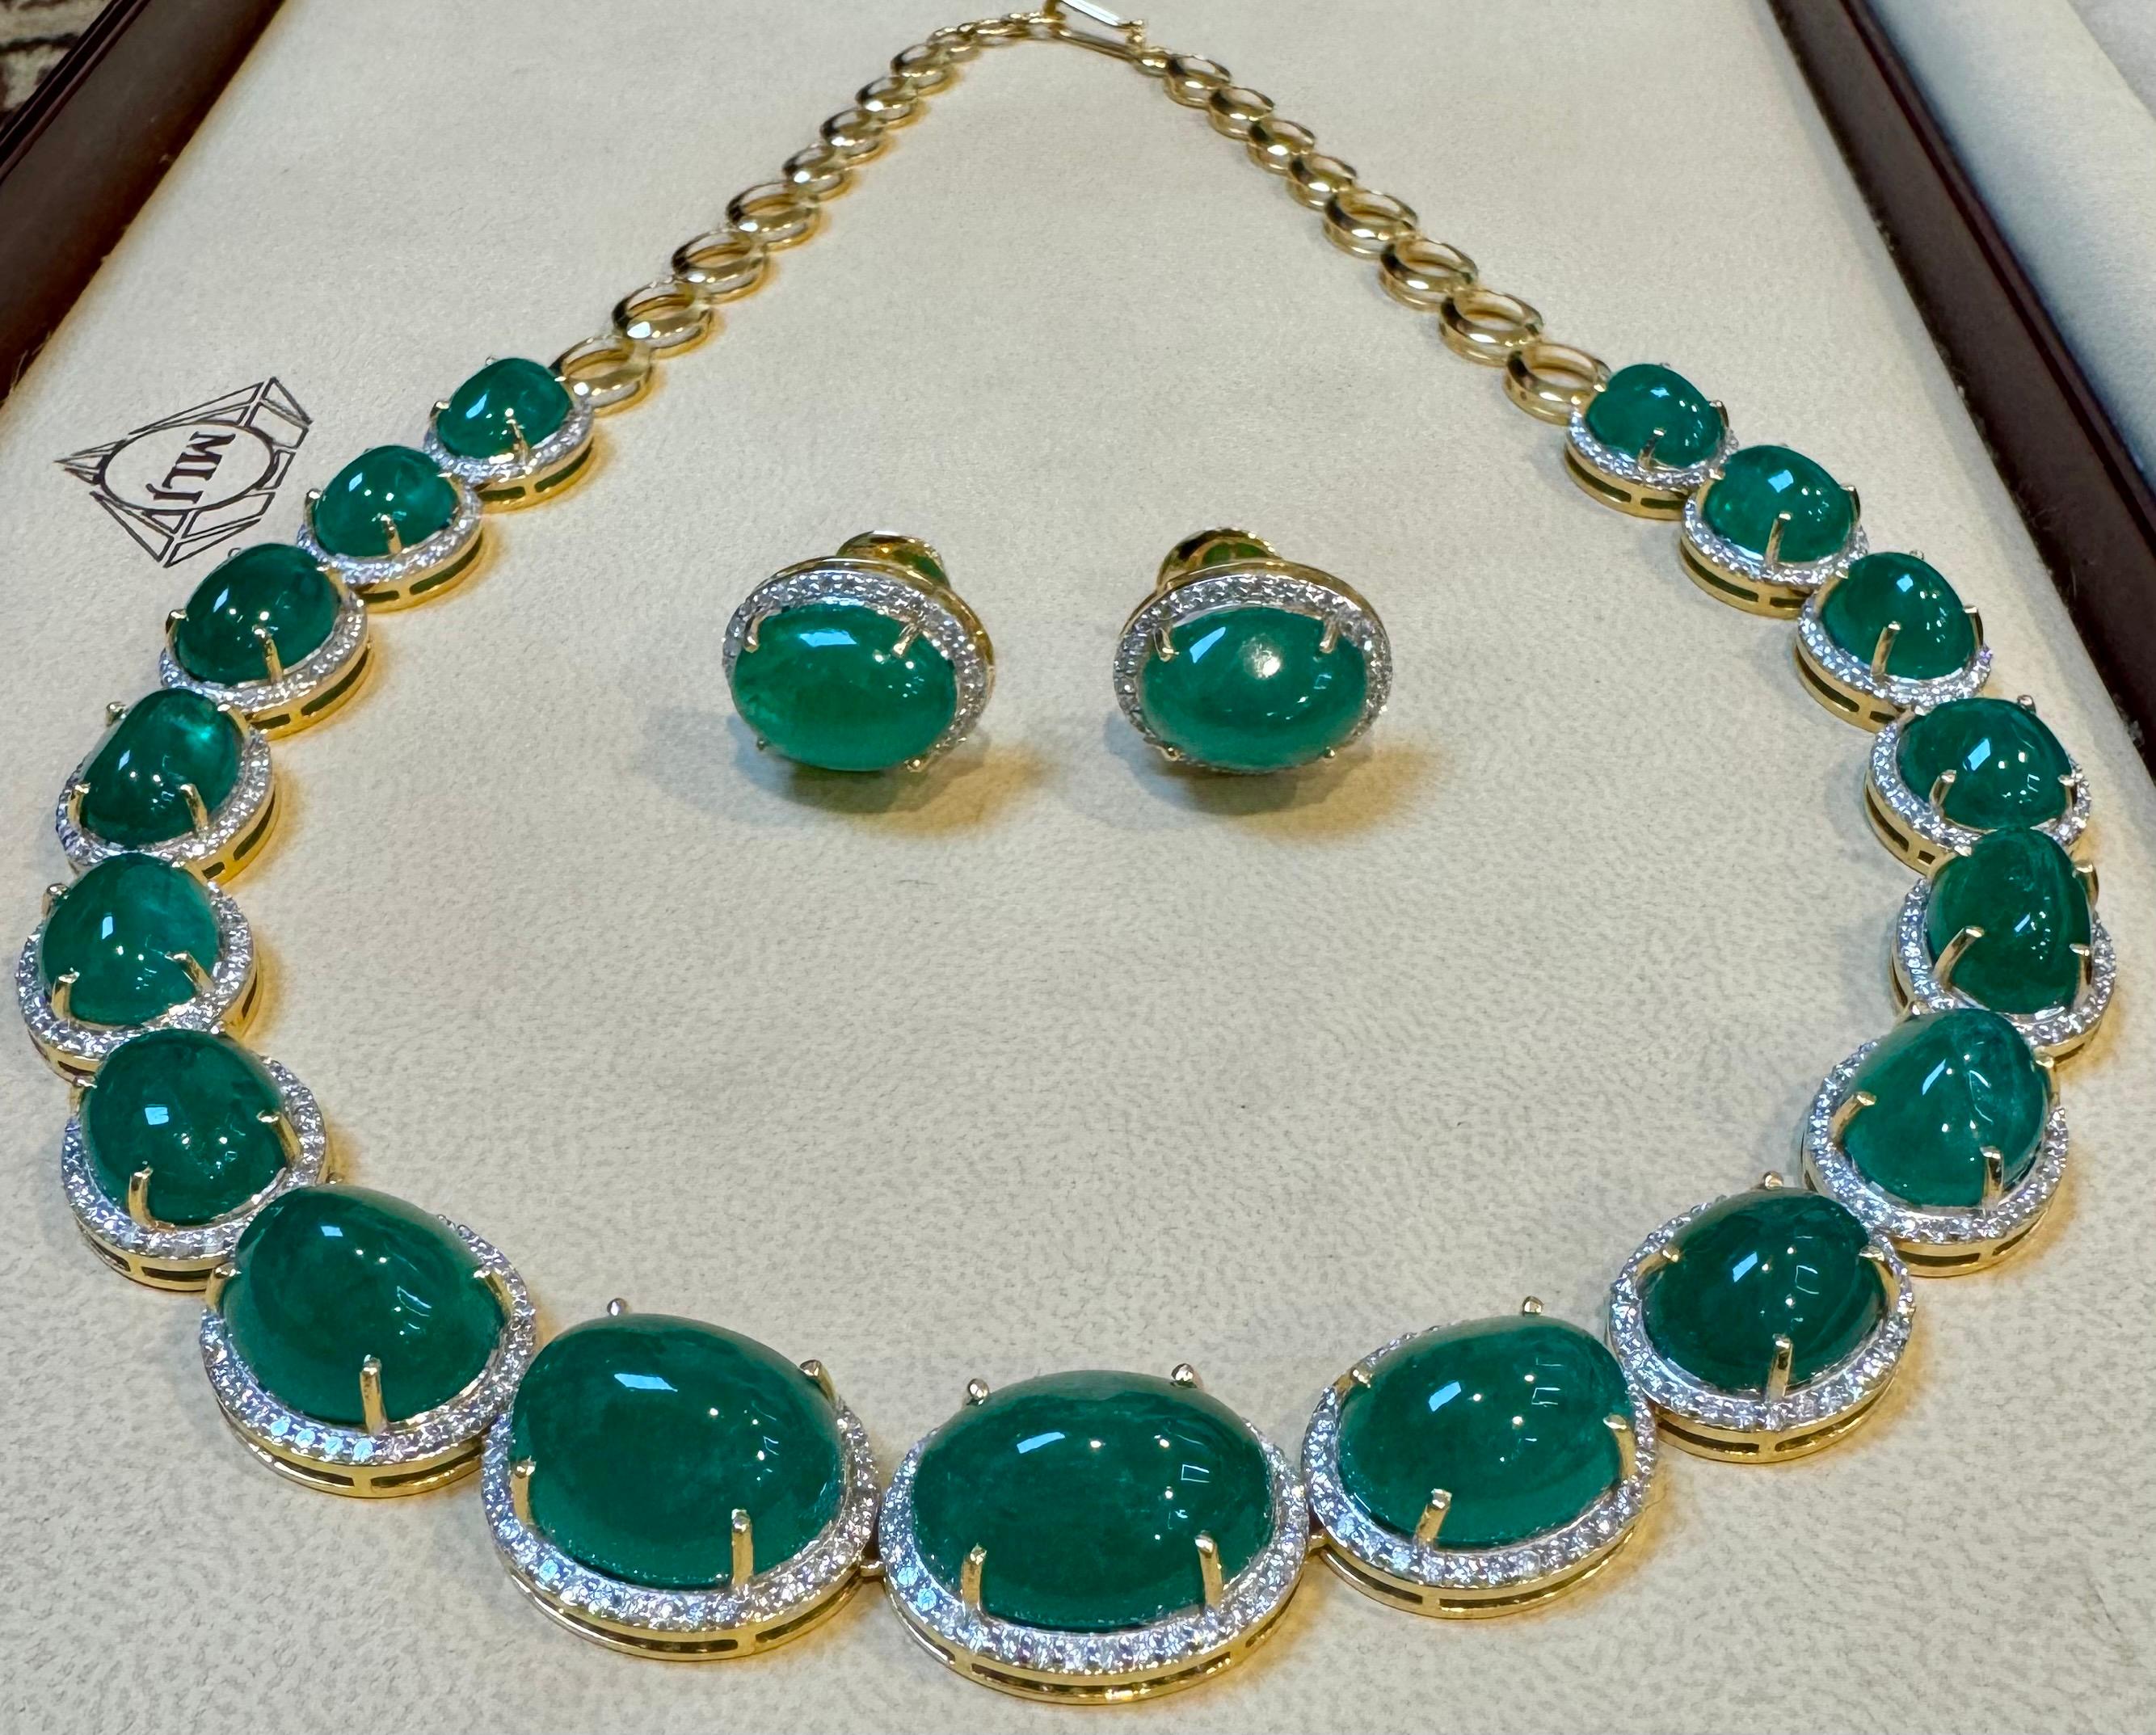 110 Ct Oval Natural Cabochon Emerald & Diamond Necklace, Earring Suite 14 K Gold For Sale 13